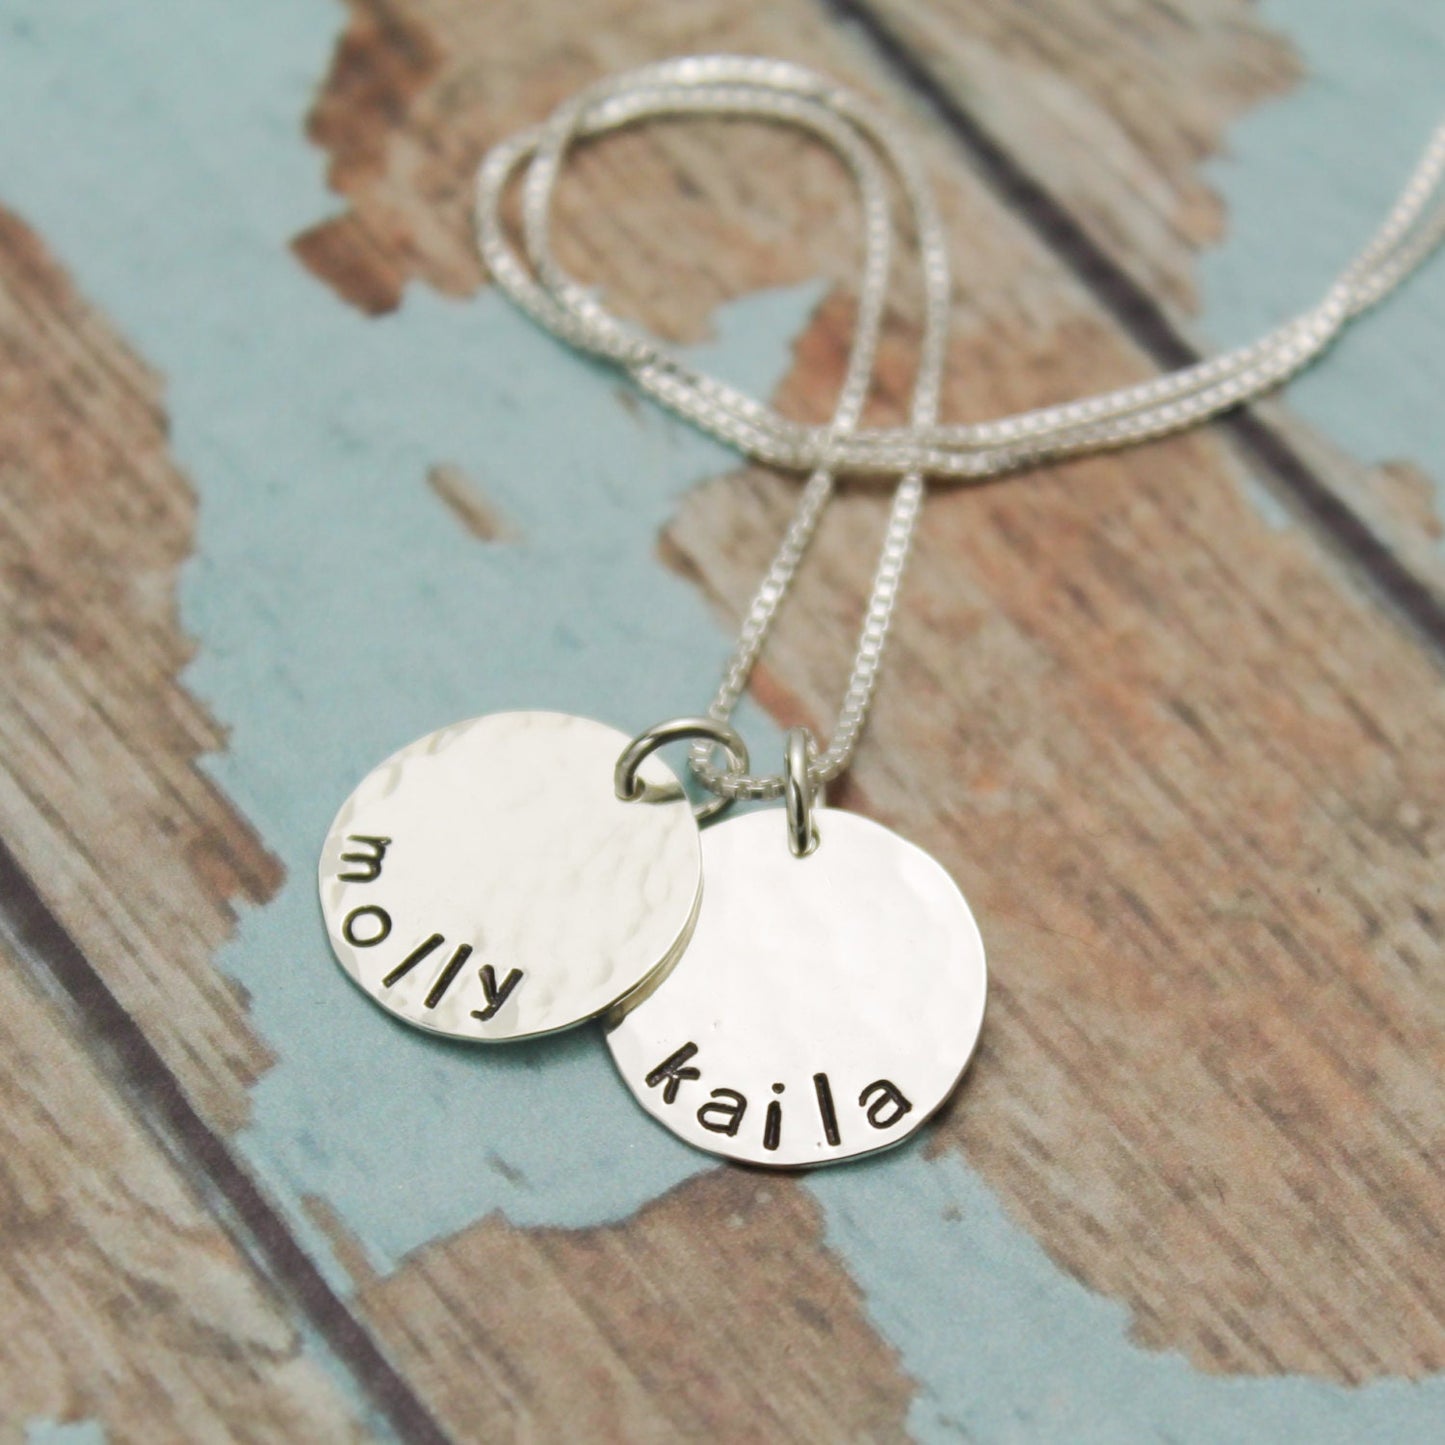 Personalized Grandma or Mommy Necklace with Two (2) Names Personalized Hand Stamped Jewelry